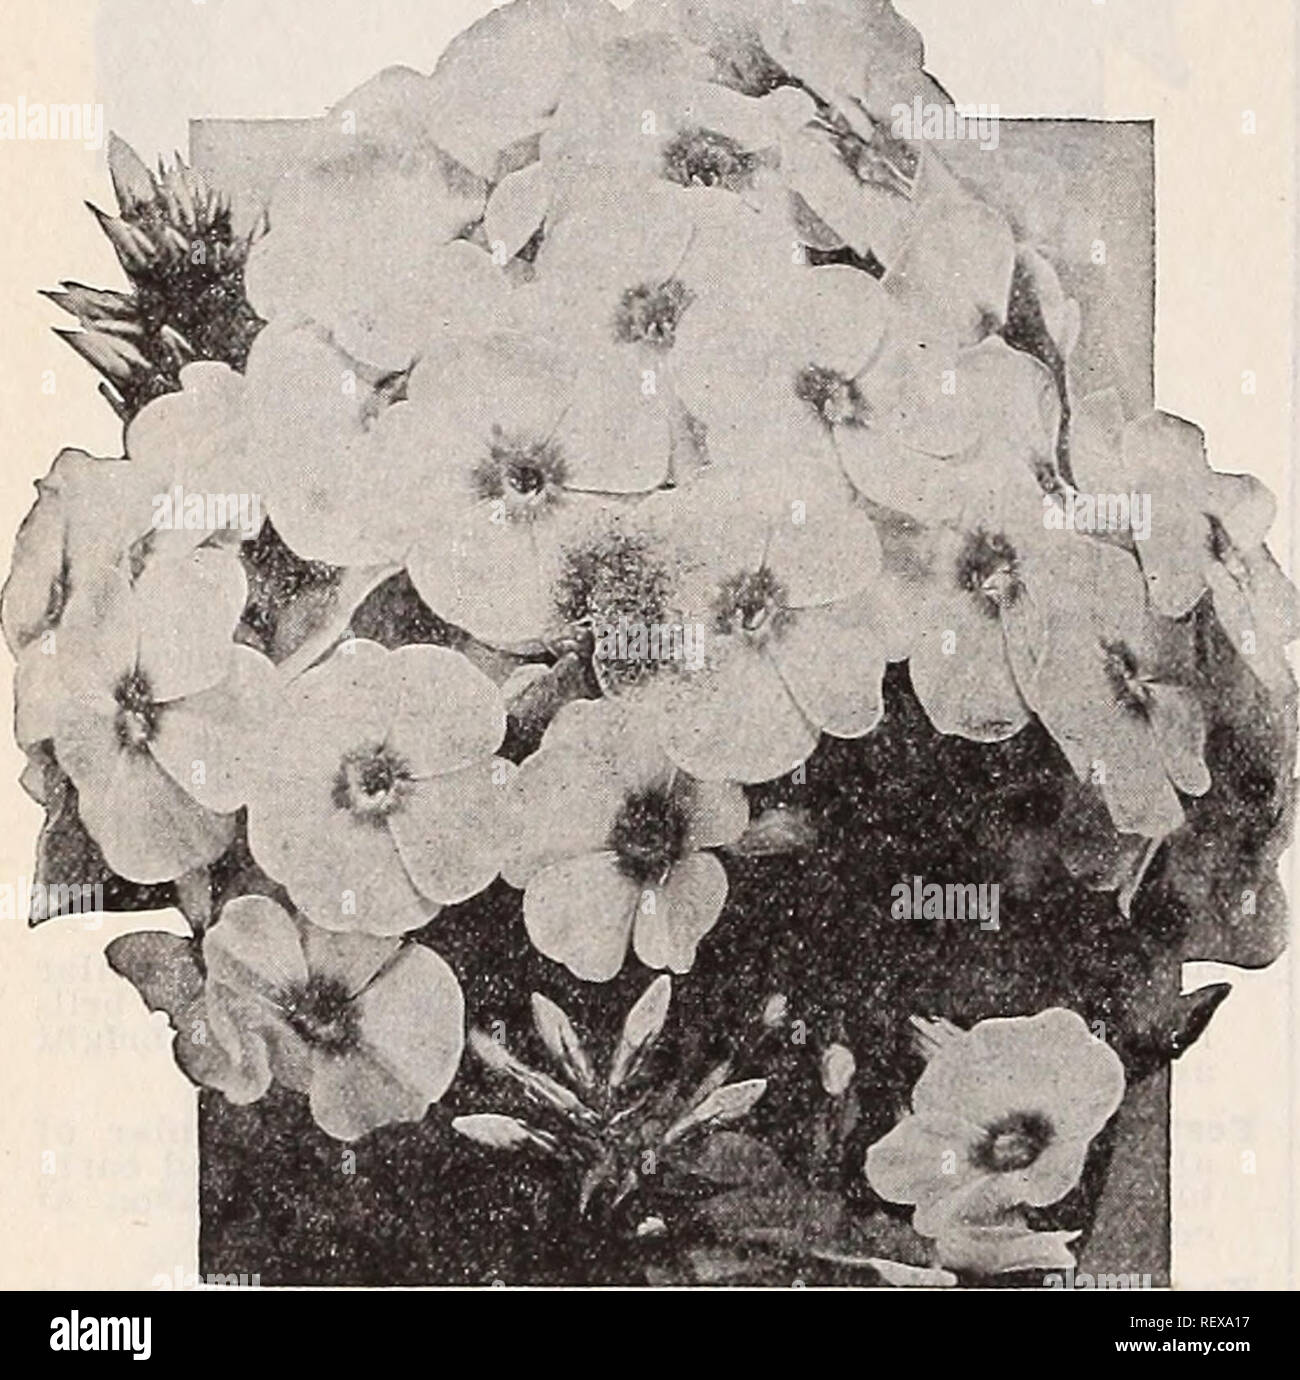 . Dreer's wholesale catalog for florists : winter - spring - summer 1938. Bulbs (Plants) Catalogs; Vegetables Seeds Catalogs; Flowers Seeds Catalogs; Nurseries (Horticulture) Catalogs; Gardening Equipment and supplies Catalogs. HENRY A. DREER Hardy Pcreniiial Plants wholesale catalog Phlox subulata—Moss or Mountain Pink Per doz. Per 100 Alba. White. 3 V2-inch pots $150 $10 00 Blue Hill (New). Deep blue. 3%-inch pots 2 00 12 00 Brilliant (New). Crimson-red. 3i/i-inch pots 2 00 12 00 Bosea. Bright rose. 3%-inch pots 1 50 10 00 Sampson. Very large flowers of a deep rose-pink. A distinct and unusu Stock Photo